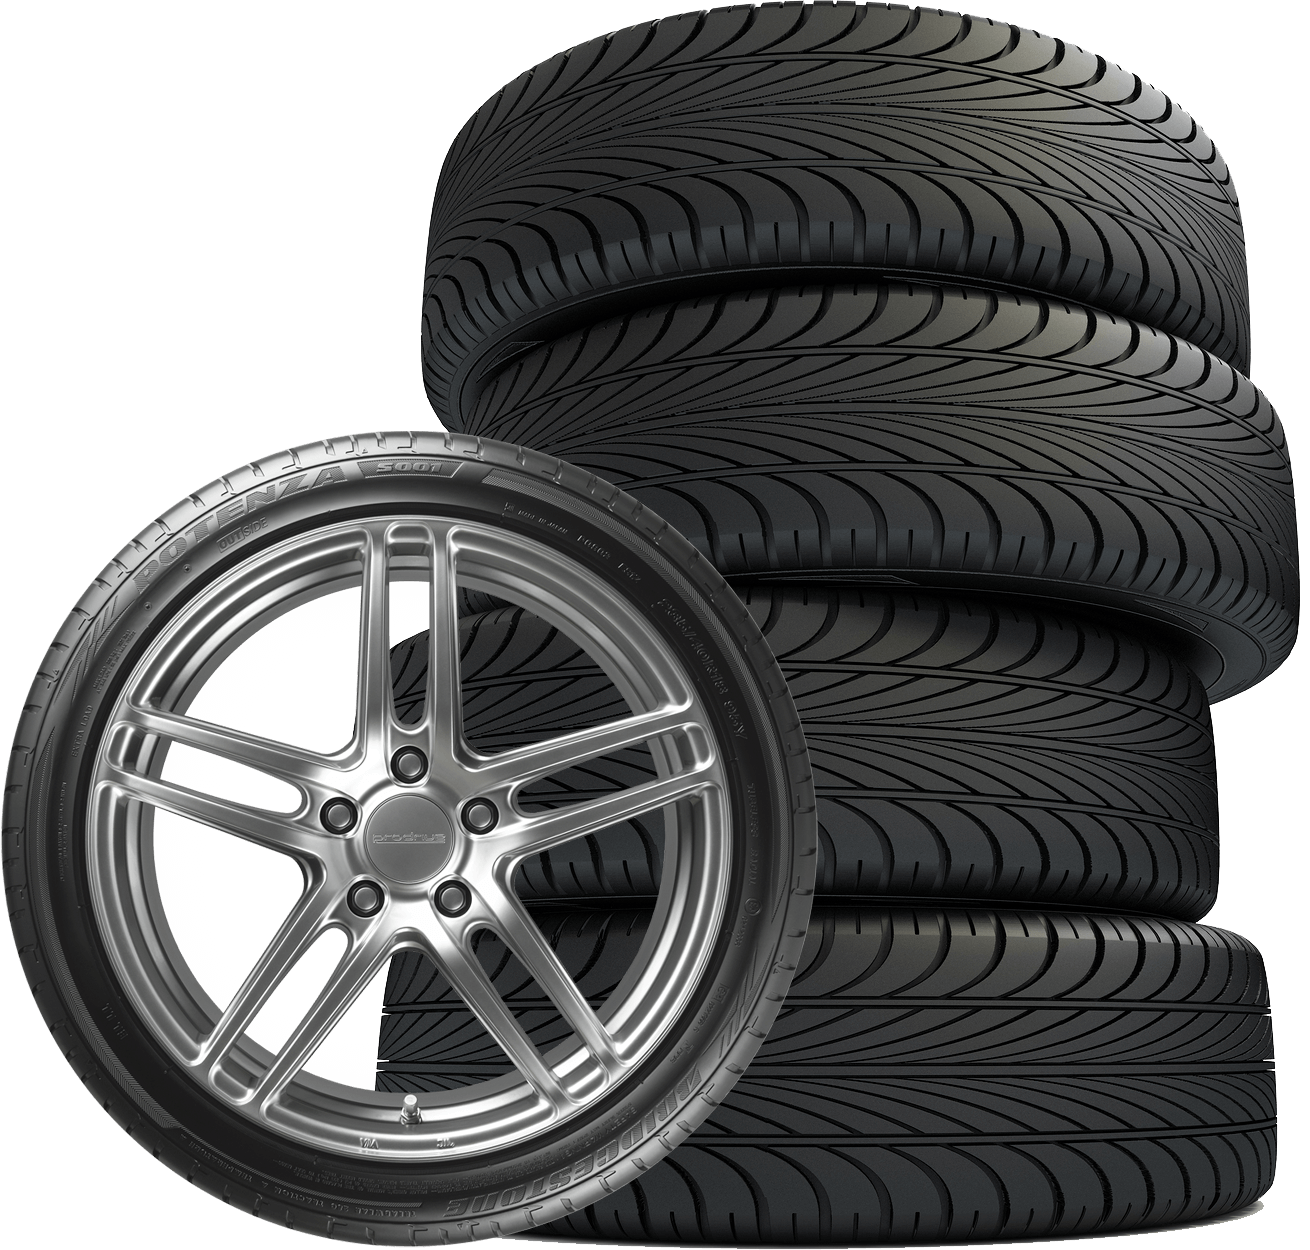 Tires Online Canada: Your Ultimate Destination for Premium Tire Solutions